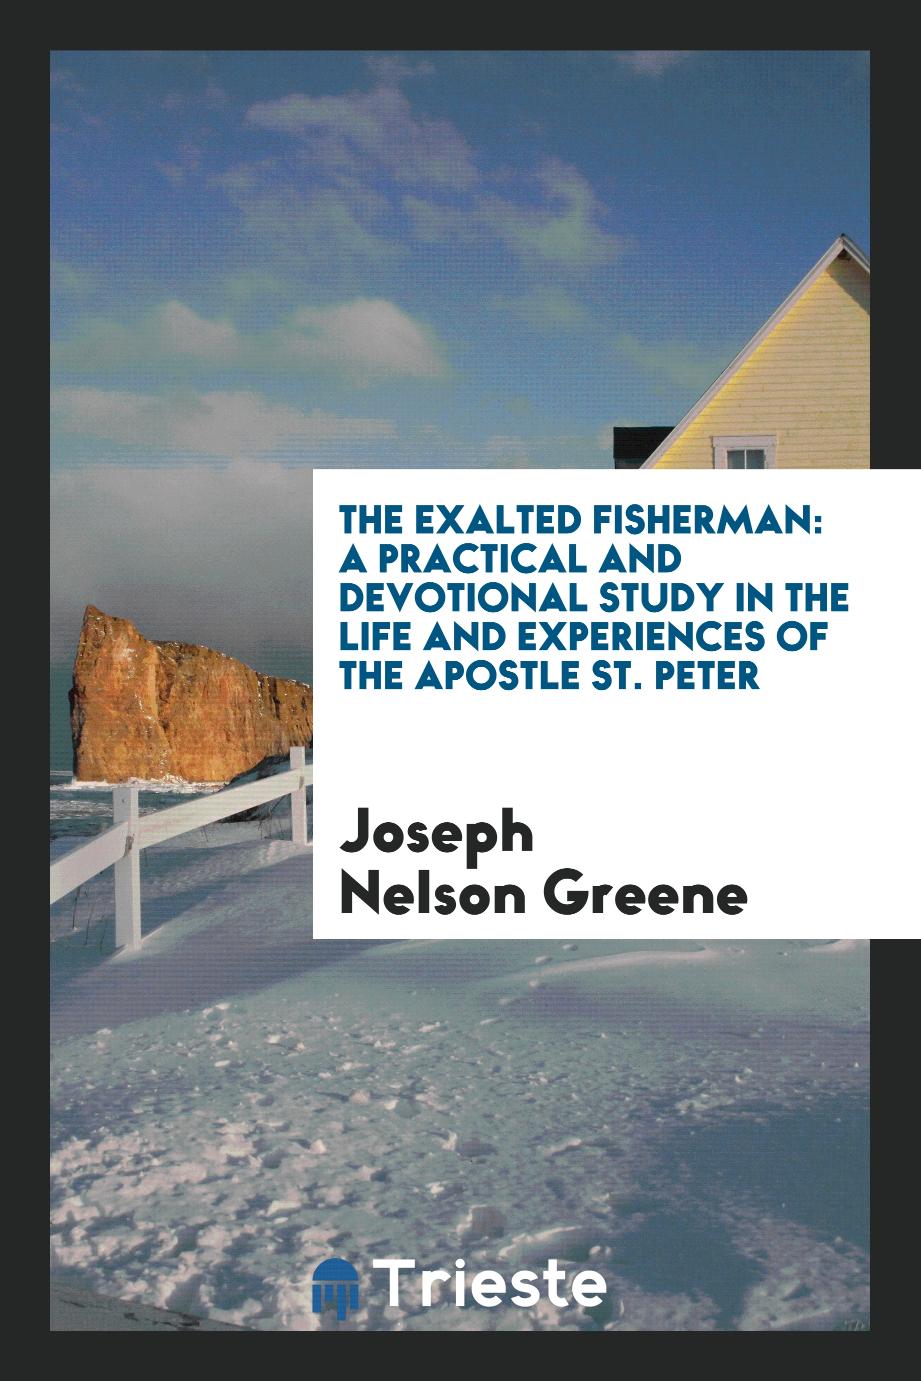 The Exalted Fisherman: A Practical and Devotional Study in the Life and Experiences of the Apostle St. Peter